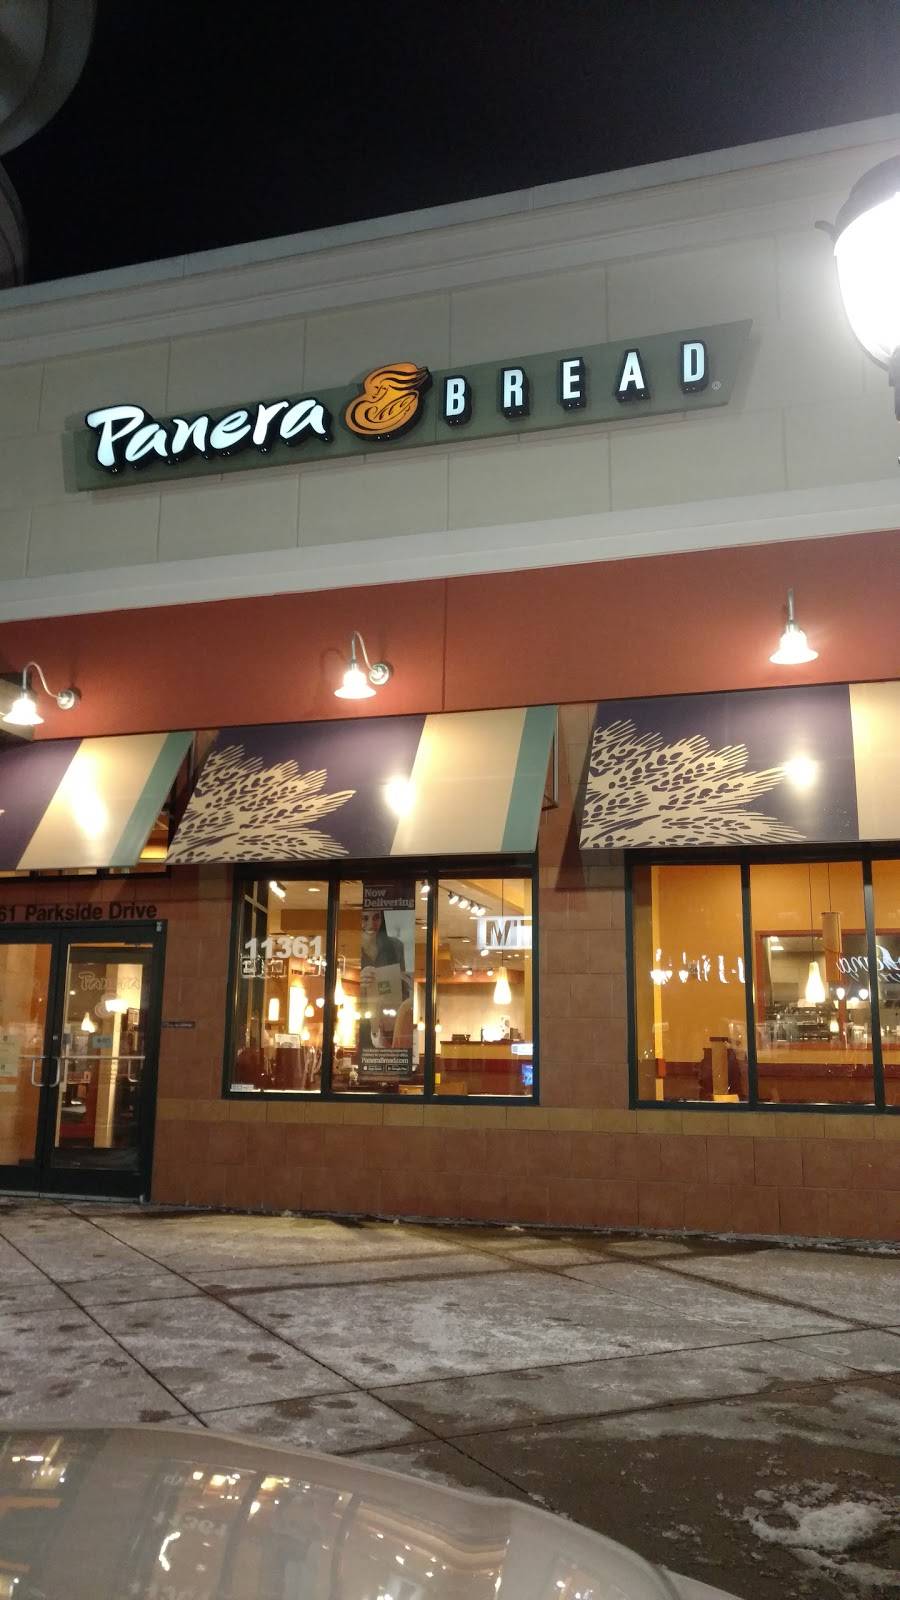 Panera Bread | bakery | 11361 Parkside Dr, Knoxville, TN 37934, USA | 8656715700 OR +1 865-671-5700